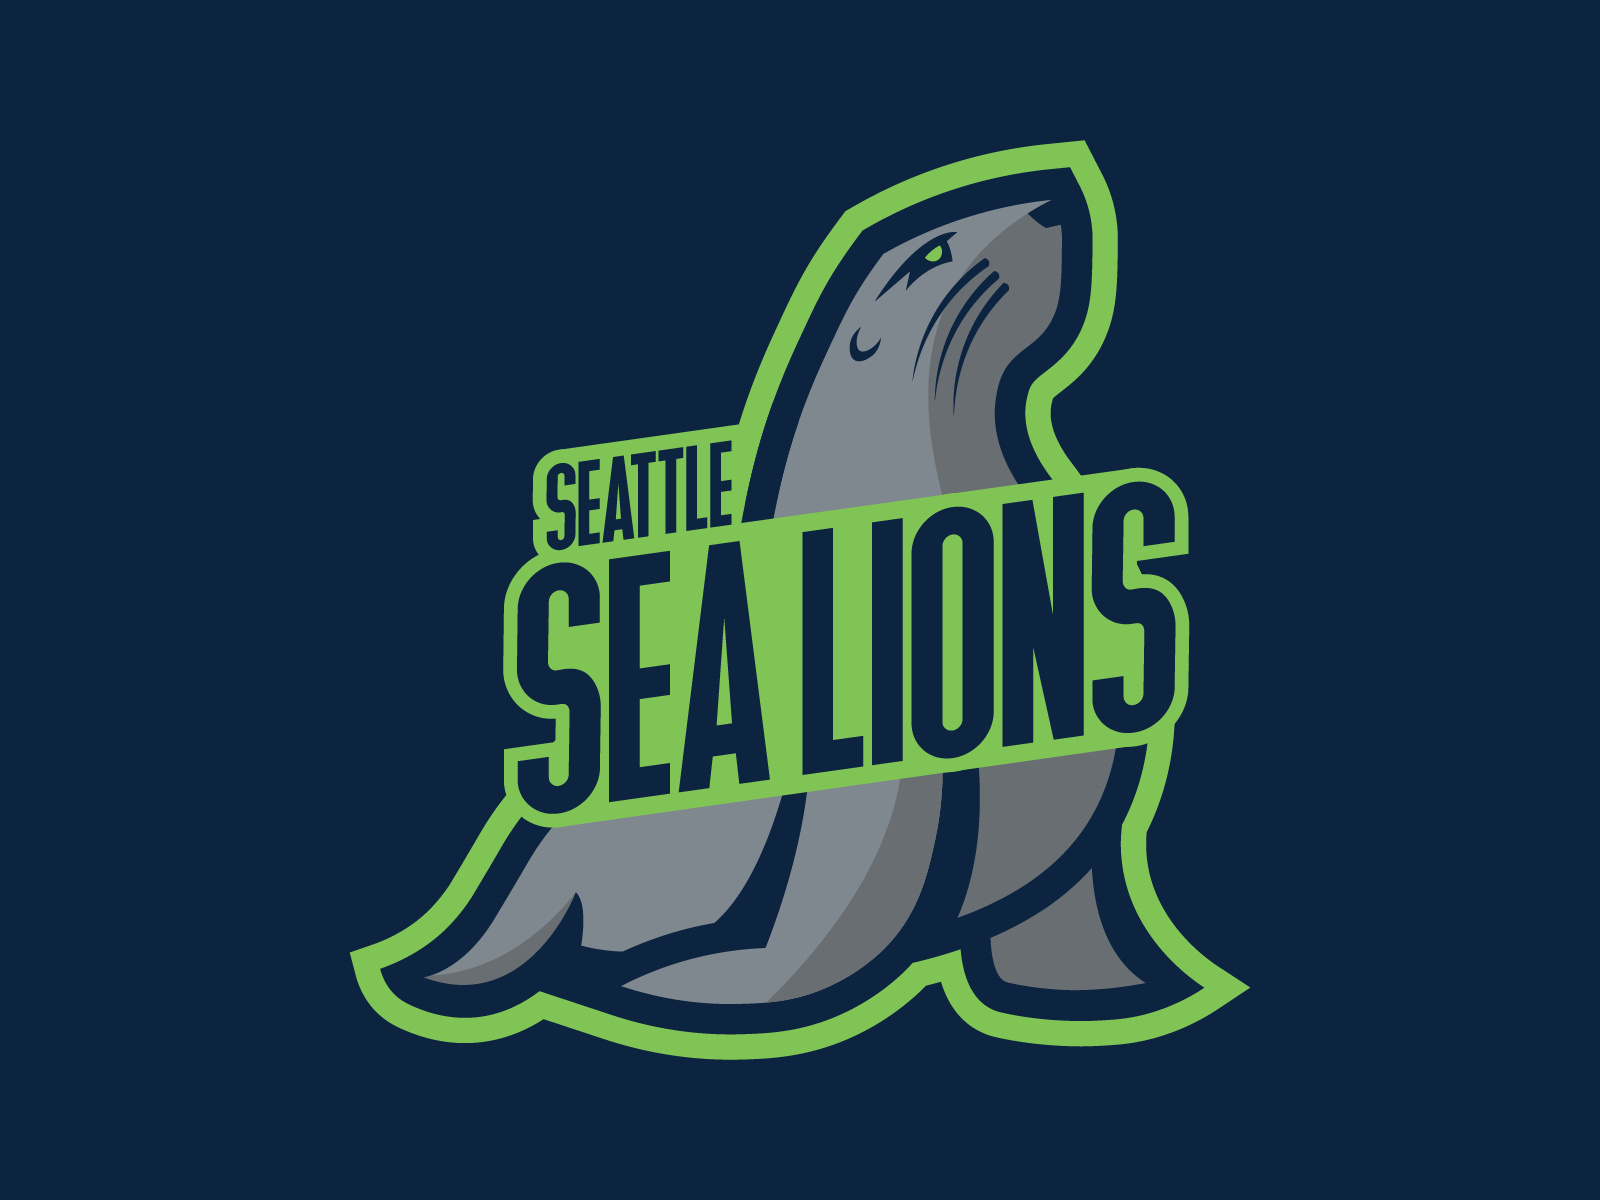 Seattle Sea Lions by Anthony Guagliardo on Dribbble